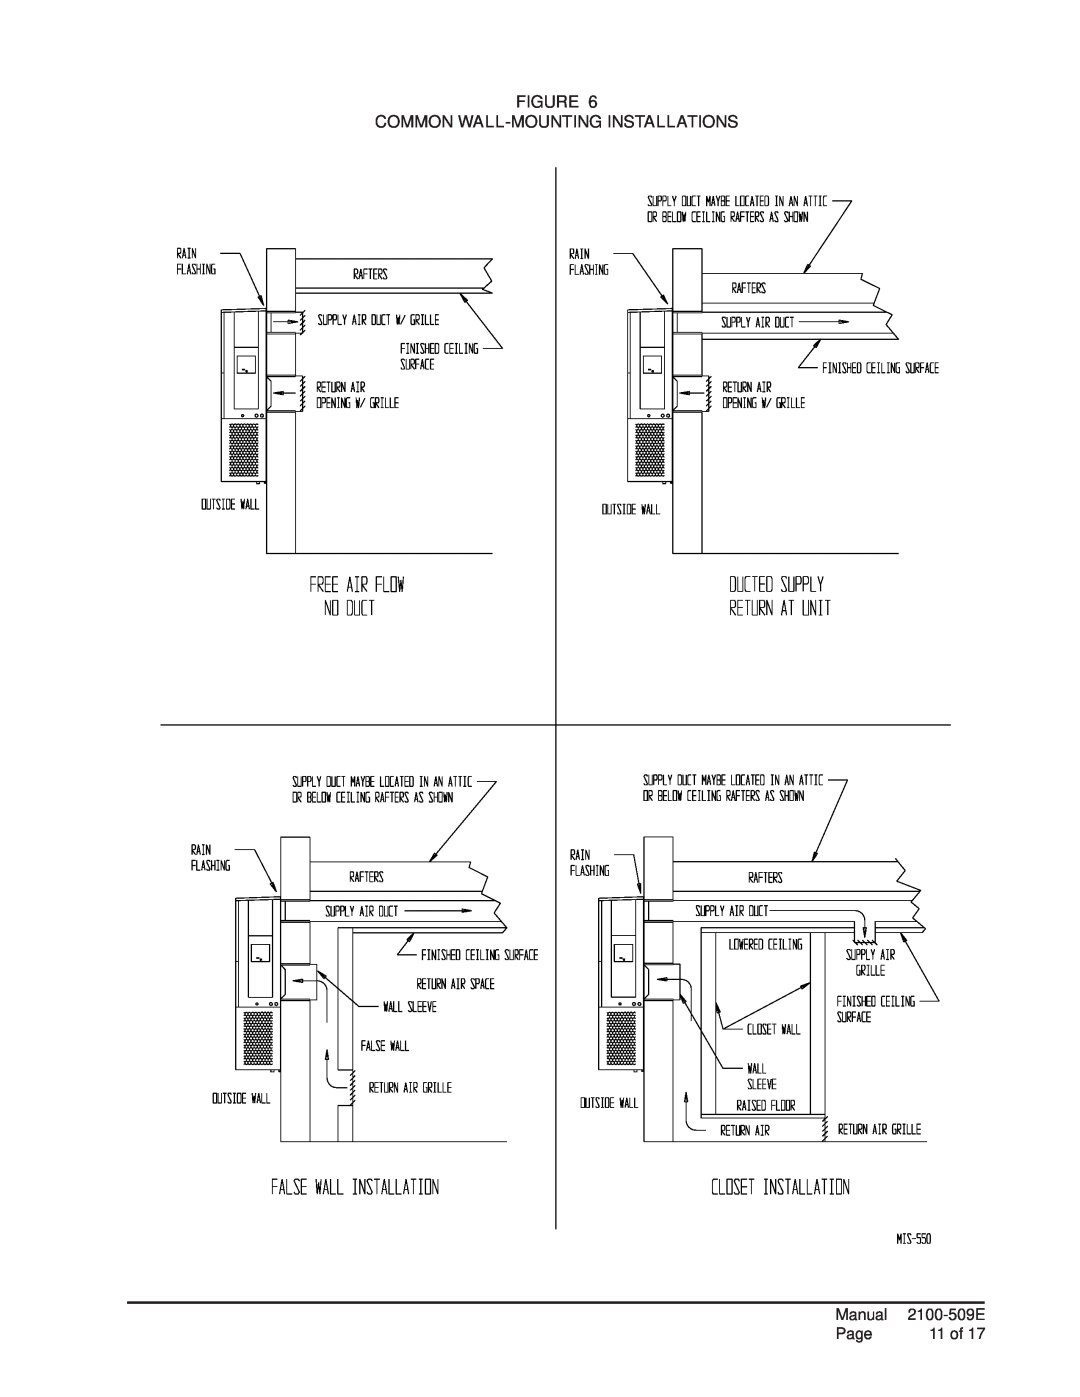 Bard W12A2-A installation instructions Figure Common Wall-Mountinginstallations, Manual, Page, 11 of 